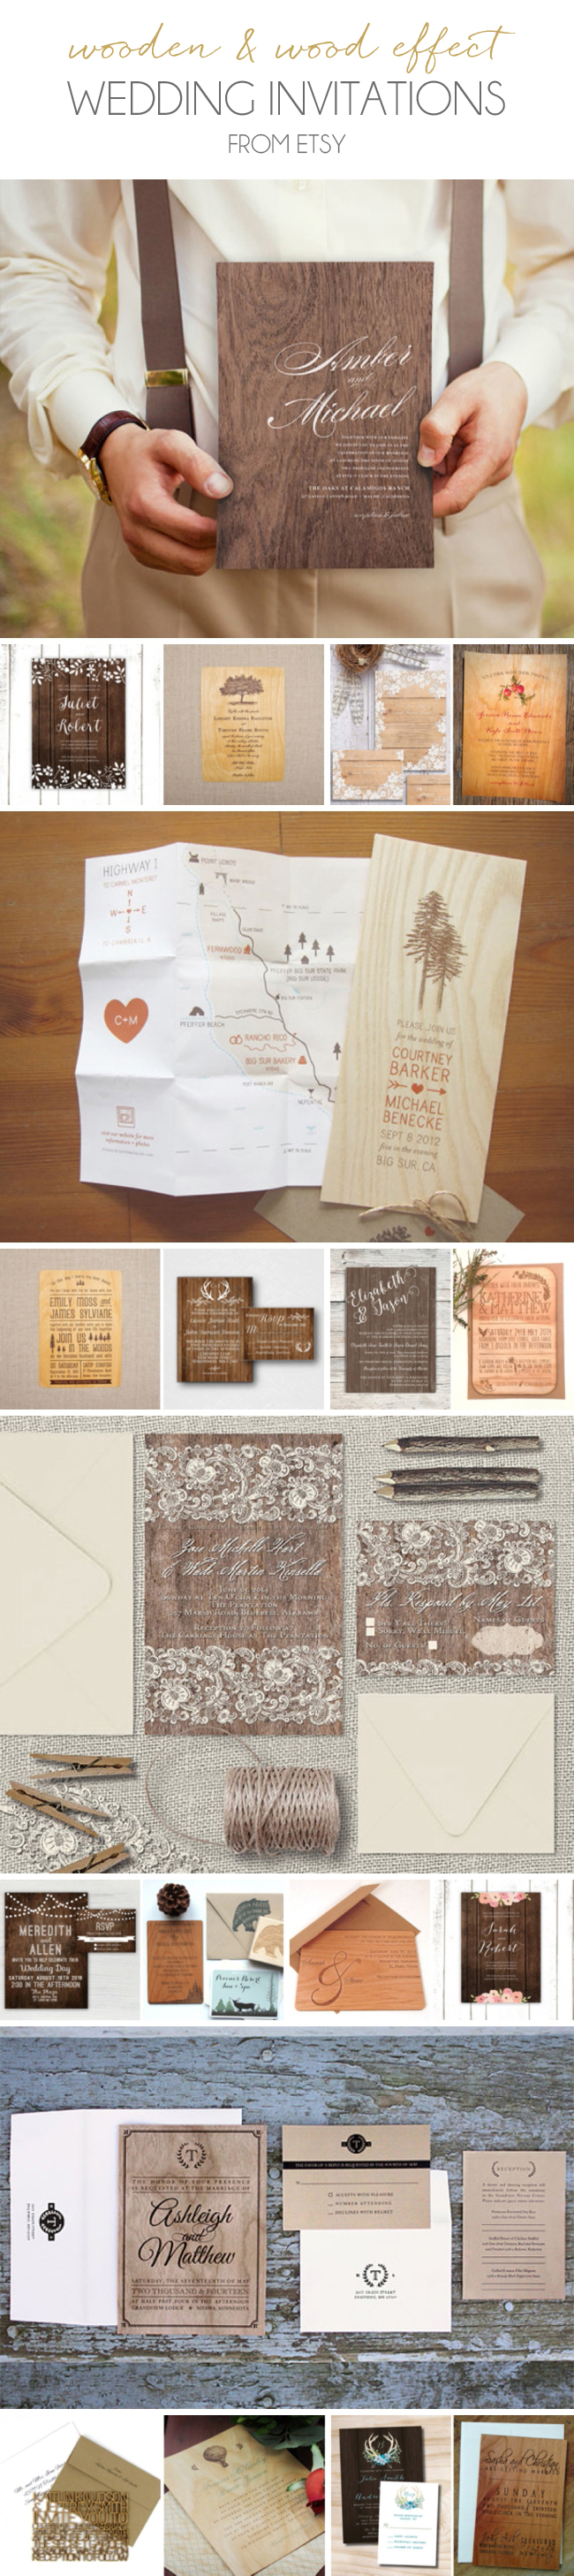 20 Wooden & Wood Effect Wedding Invitations from Etsy